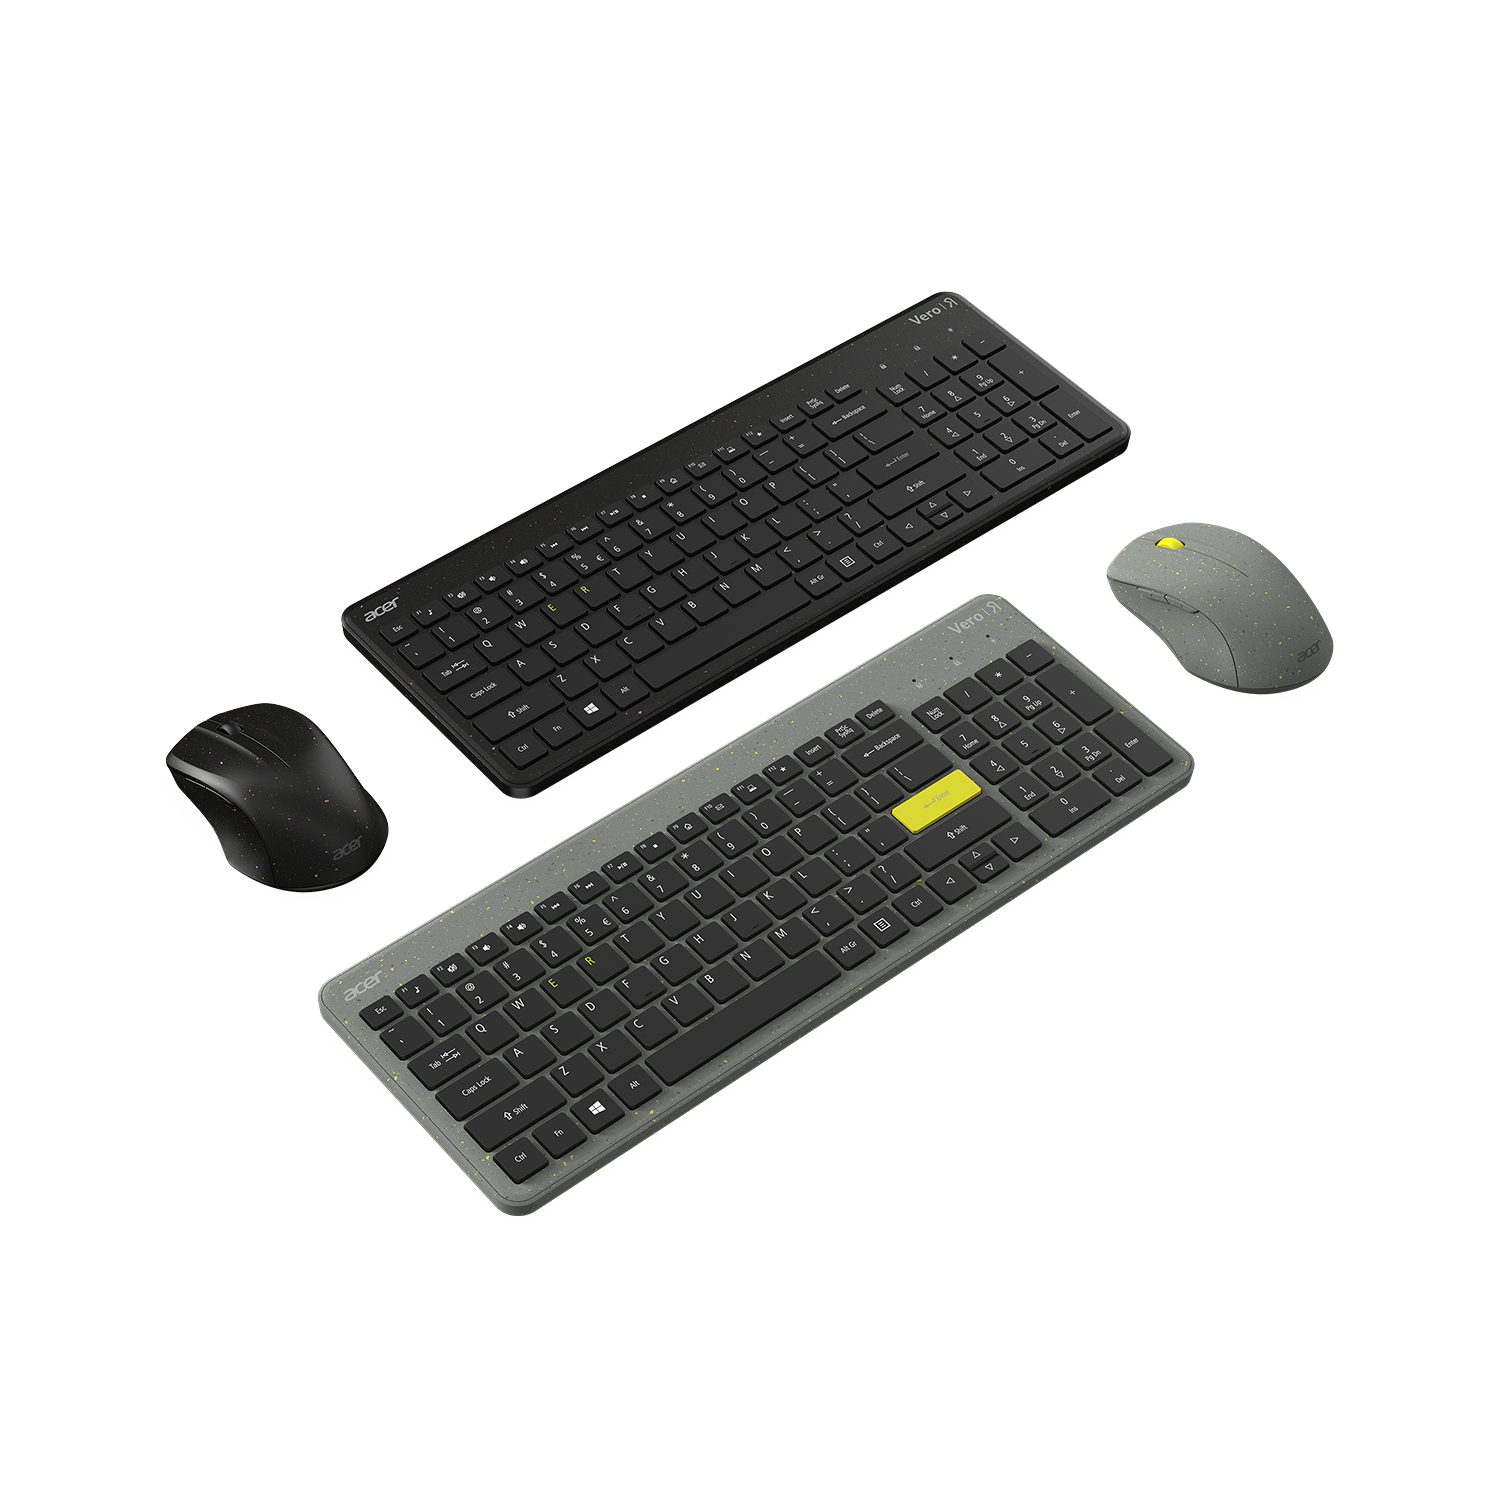 Vero-Keyboard-Mouse-01.png